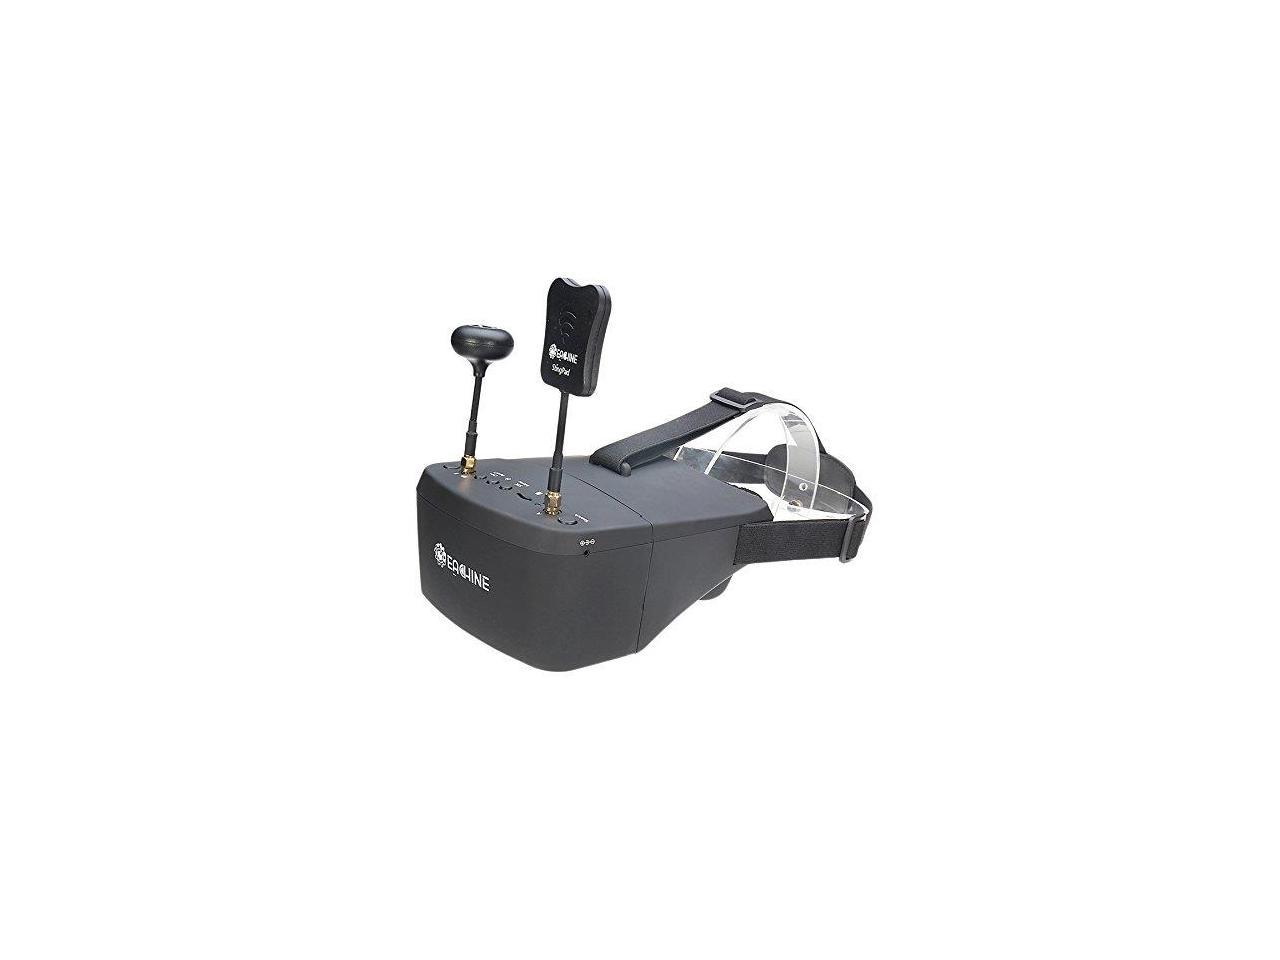 EACHINE EV800D FPV Goggles with DVR 5.8G 40CH 5 Inch 800x480 Diversity Video Headset Build in Battery